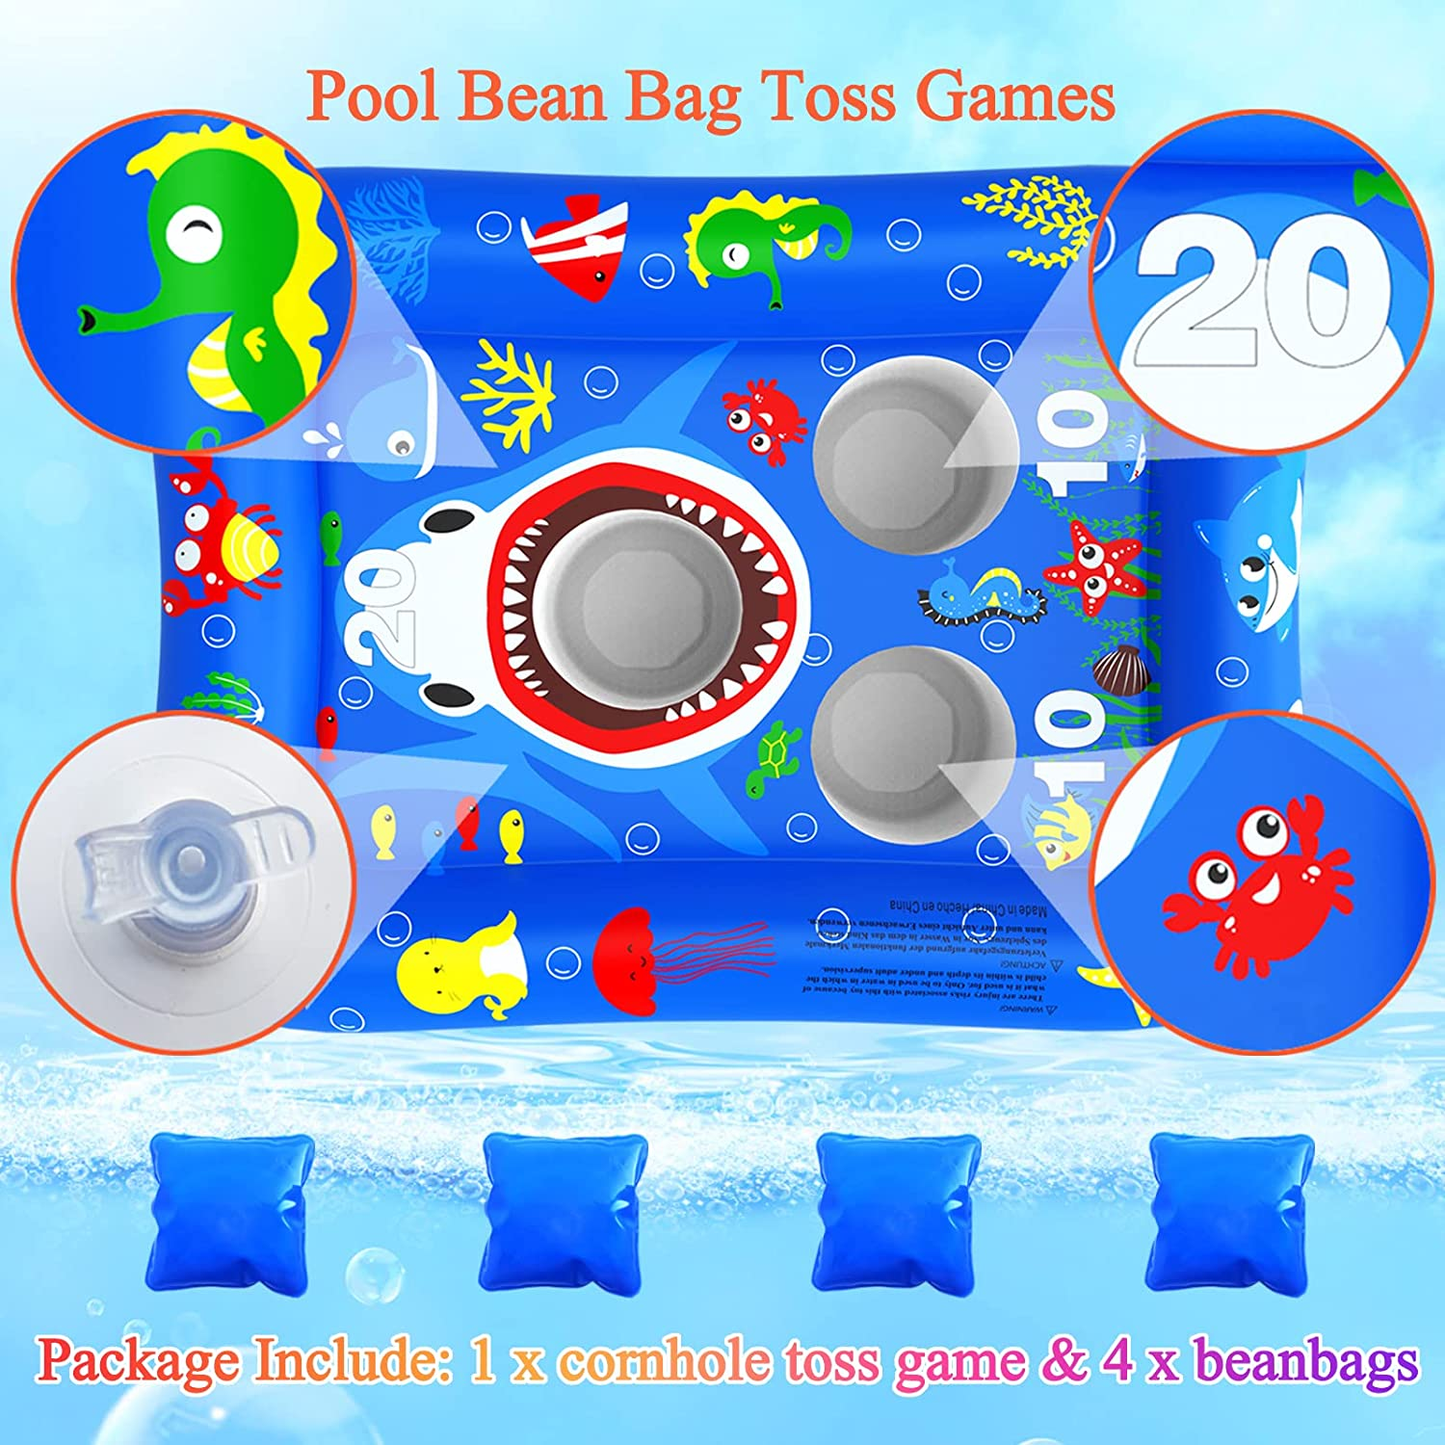 Inflatable Pool Toss Games Toys, 33" Cornhole Bean Bag Toss Games with 4 Beanbags, Floating Toss Game for Kids Adults Pool Party Games